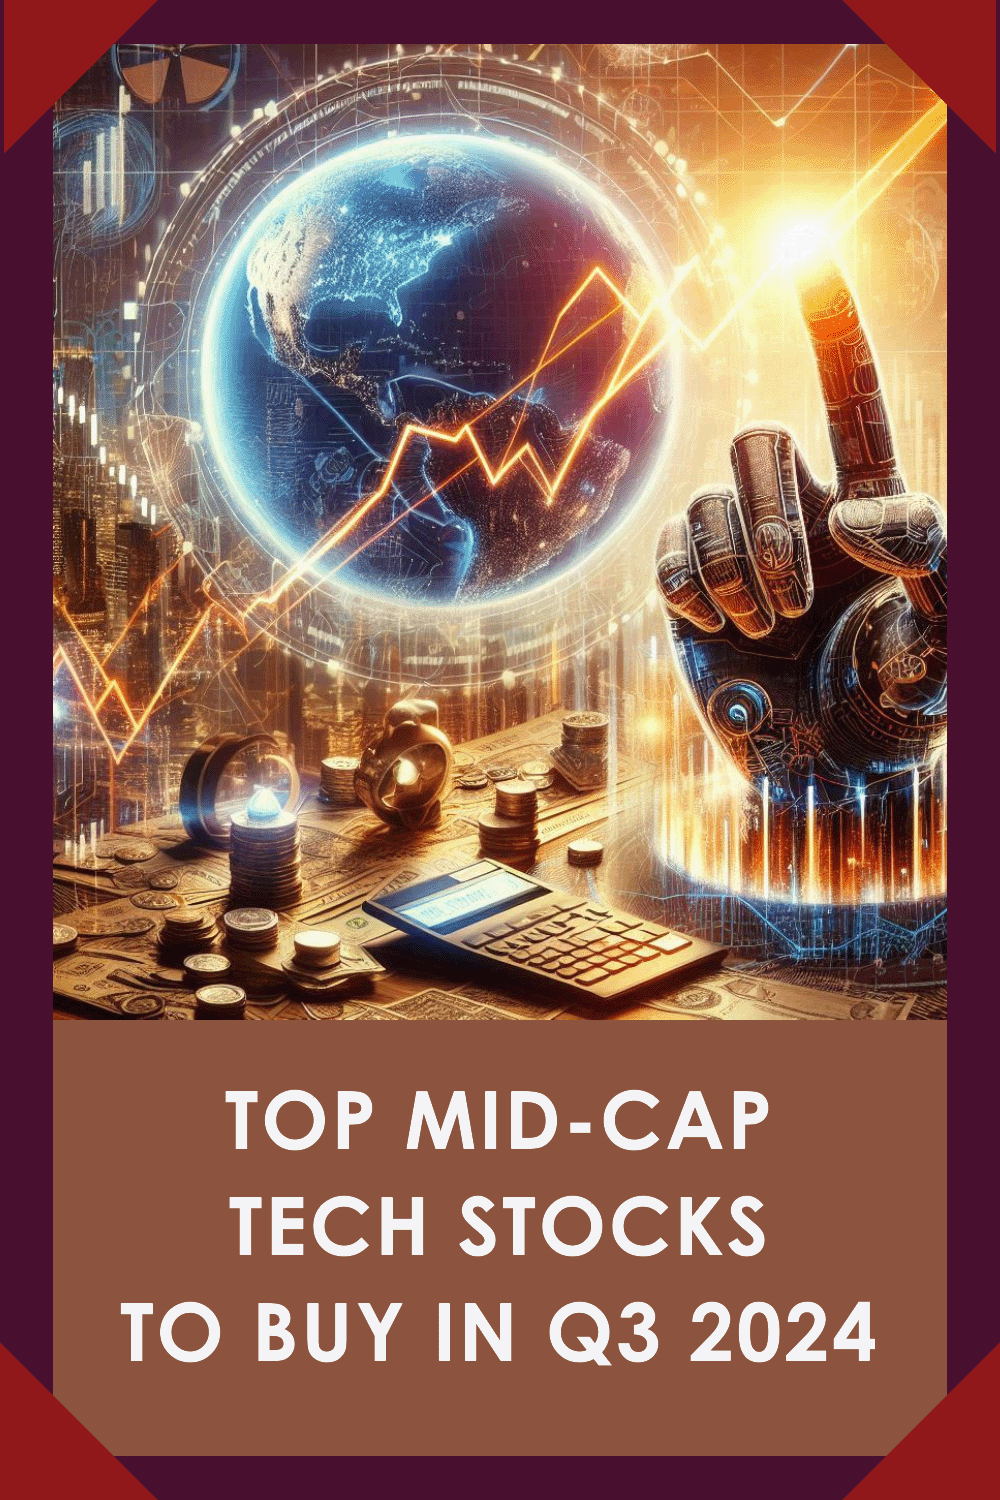 Best mid-cap tech stocks to invest in Q3 2024